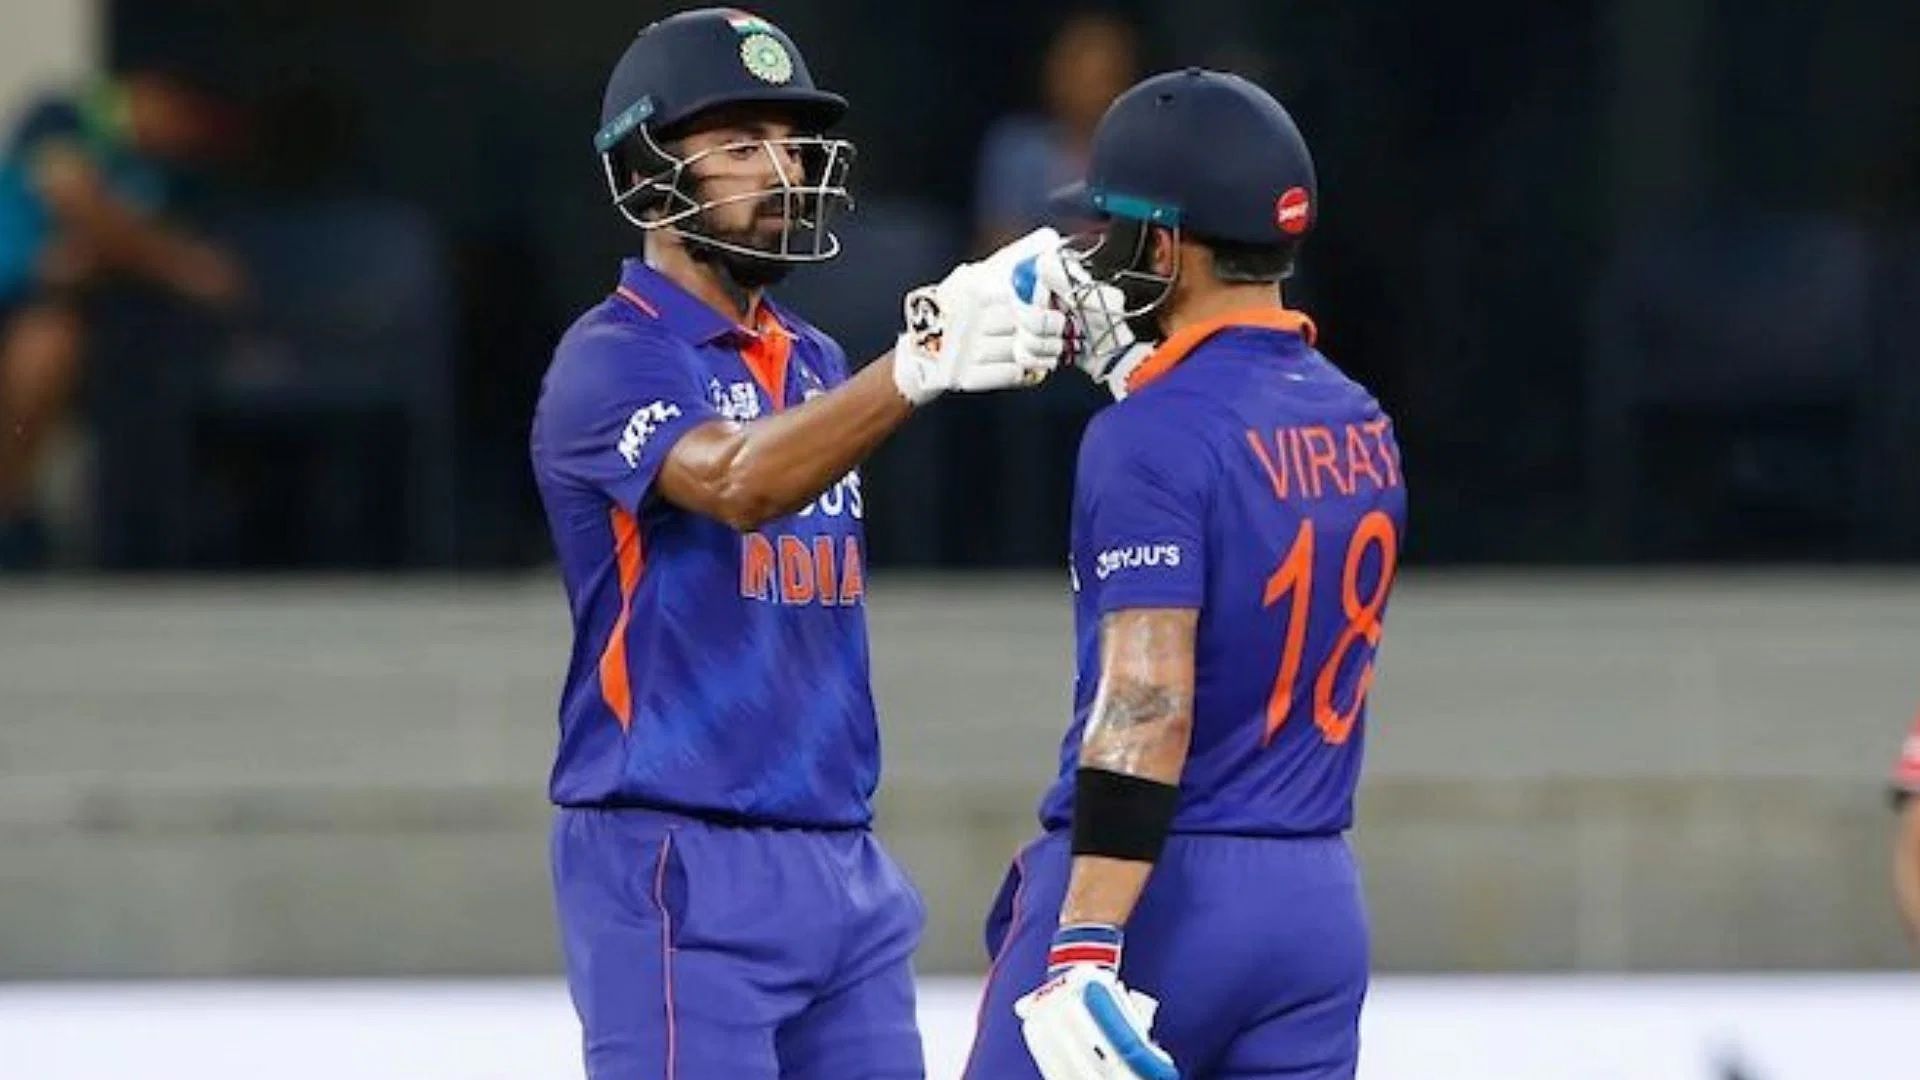 KL Rahul and Virat Kohli looked in good touch in the Super 4 game against Pakistan. [P/C: Twitter]